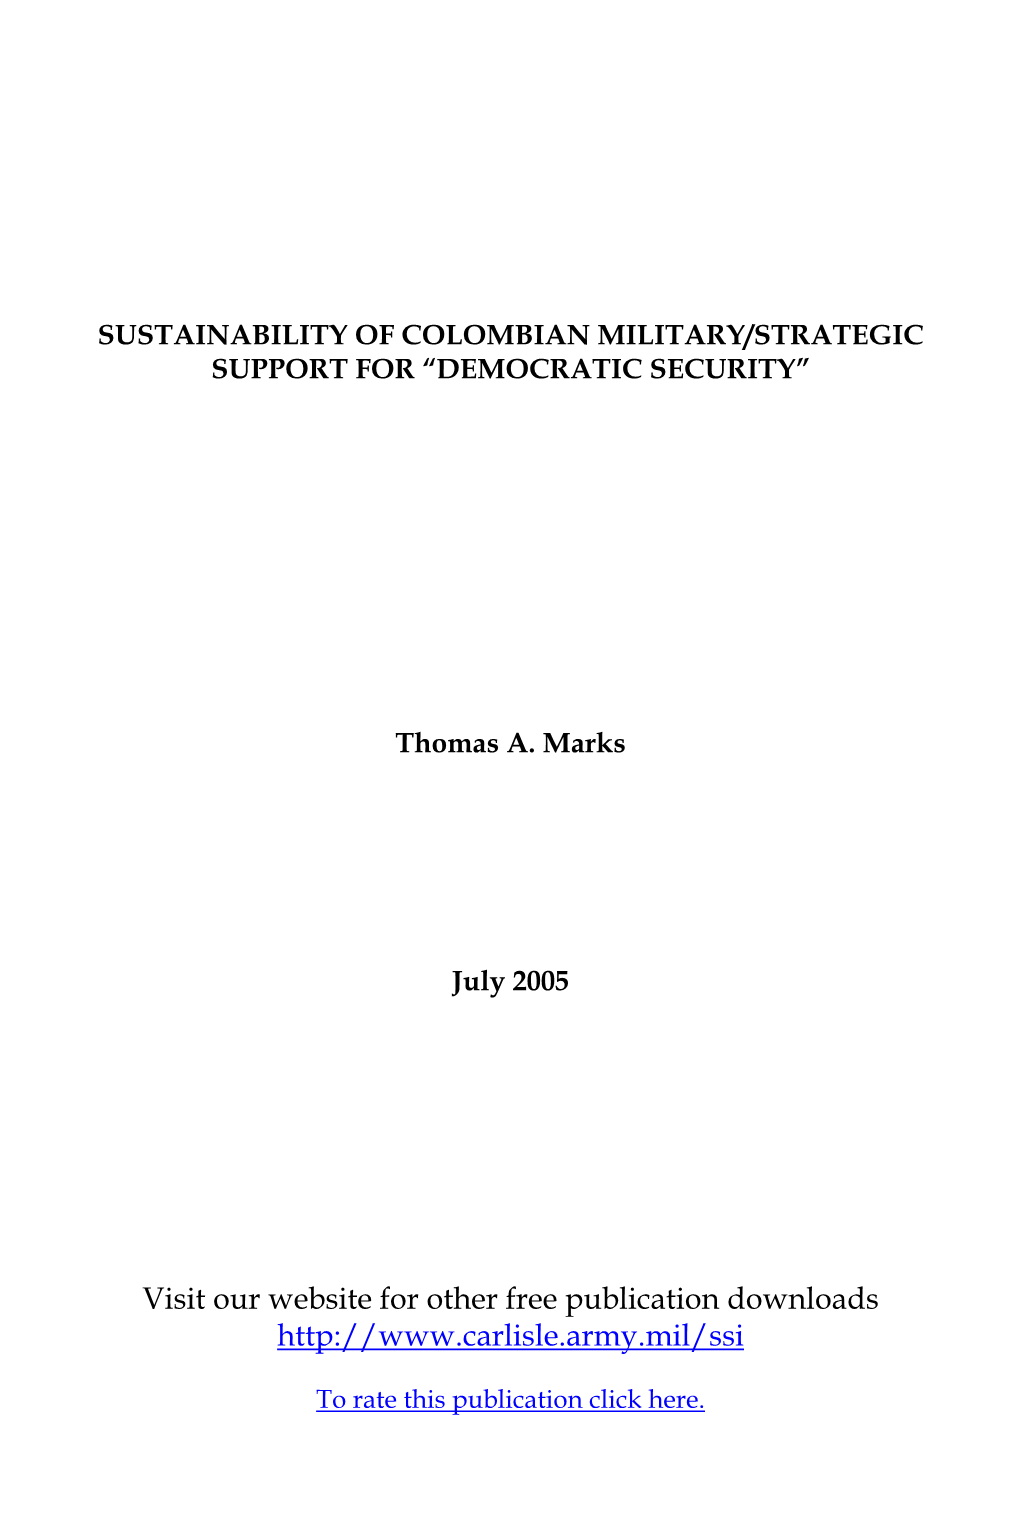 Sustainability of Colombian Military/Strategic Support for "Democratic Security"